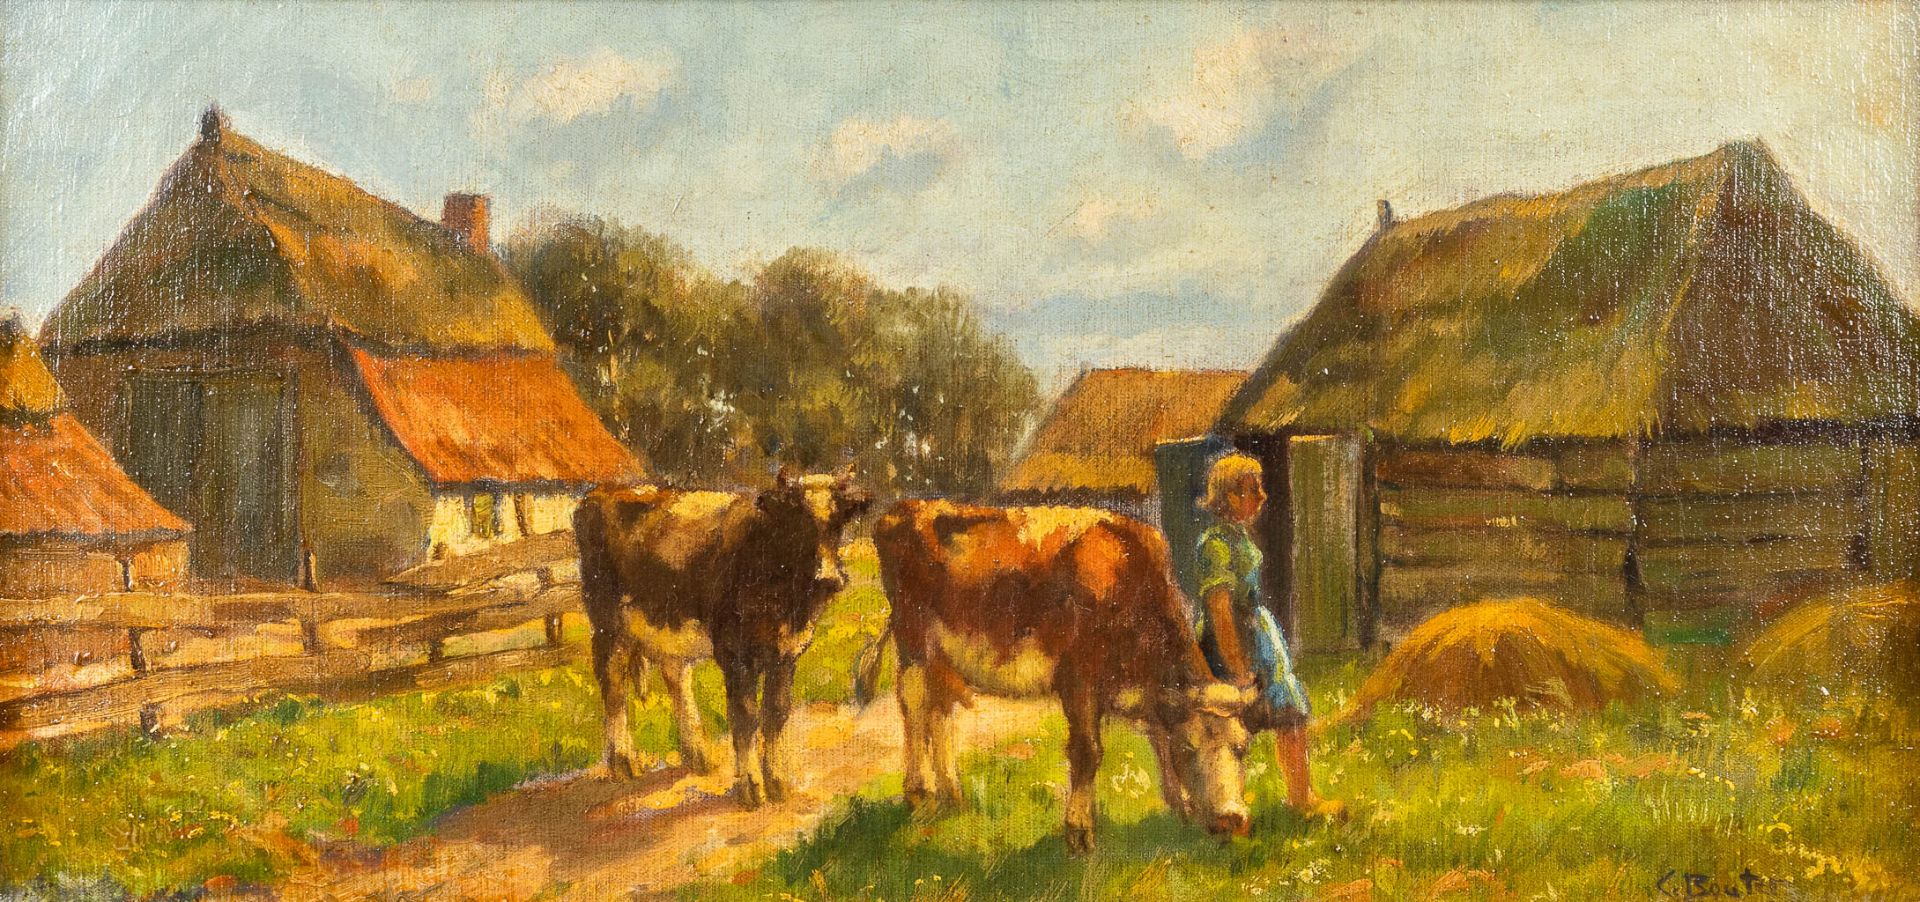 Cornelius Wouter BOUTER (1888-1966) 'Farm with cows', oil on canvas. (W:58 x H:27 cm)